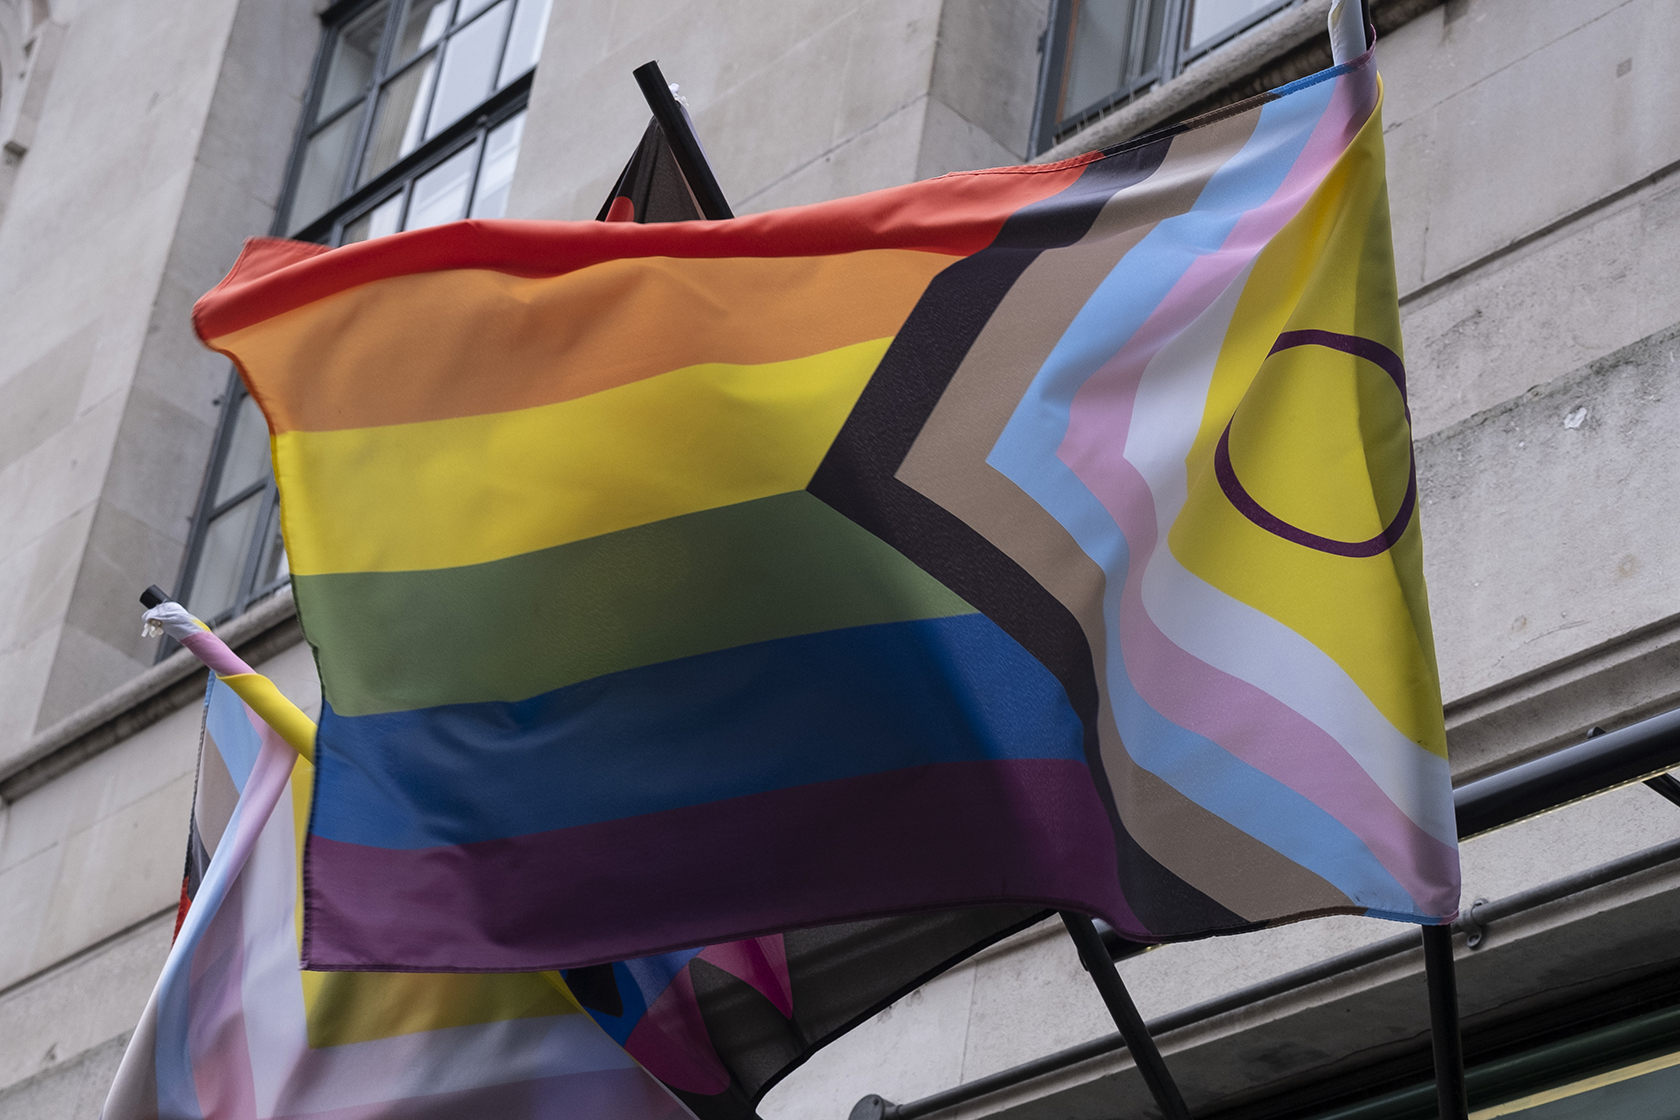 Social club provides a safe space for the gay community